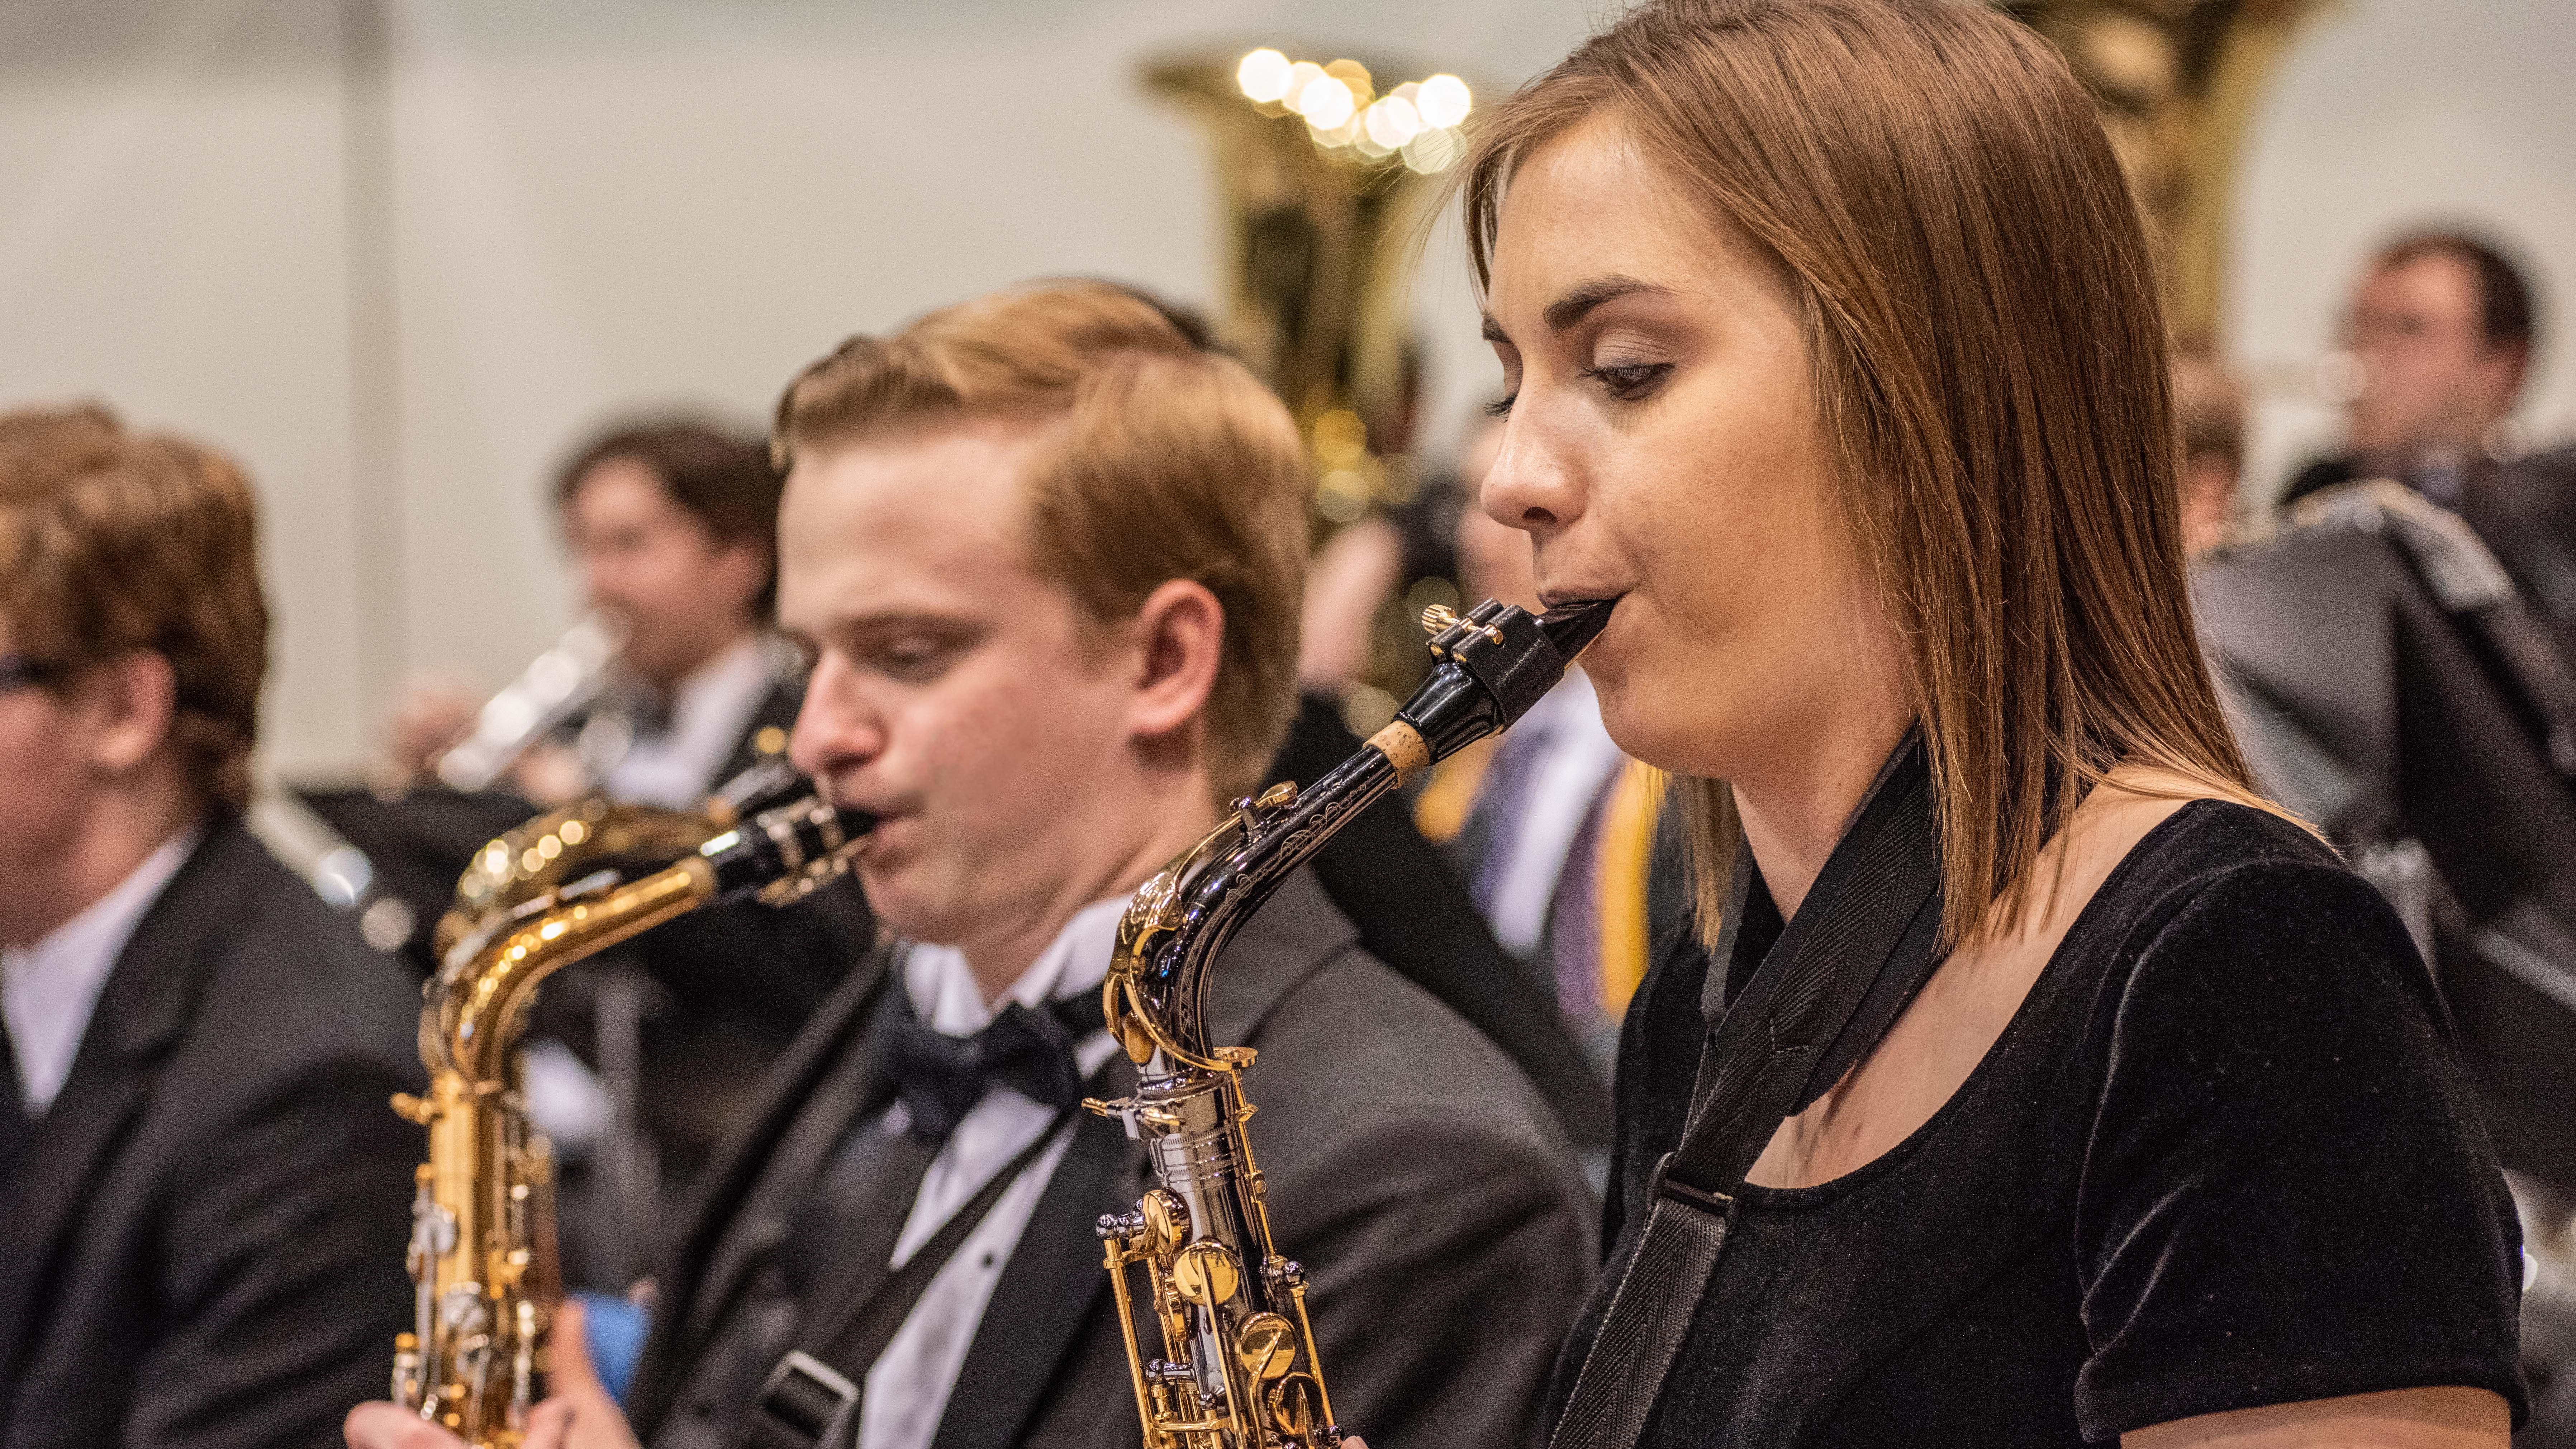 Two saxophone players participating in concert band at commencement